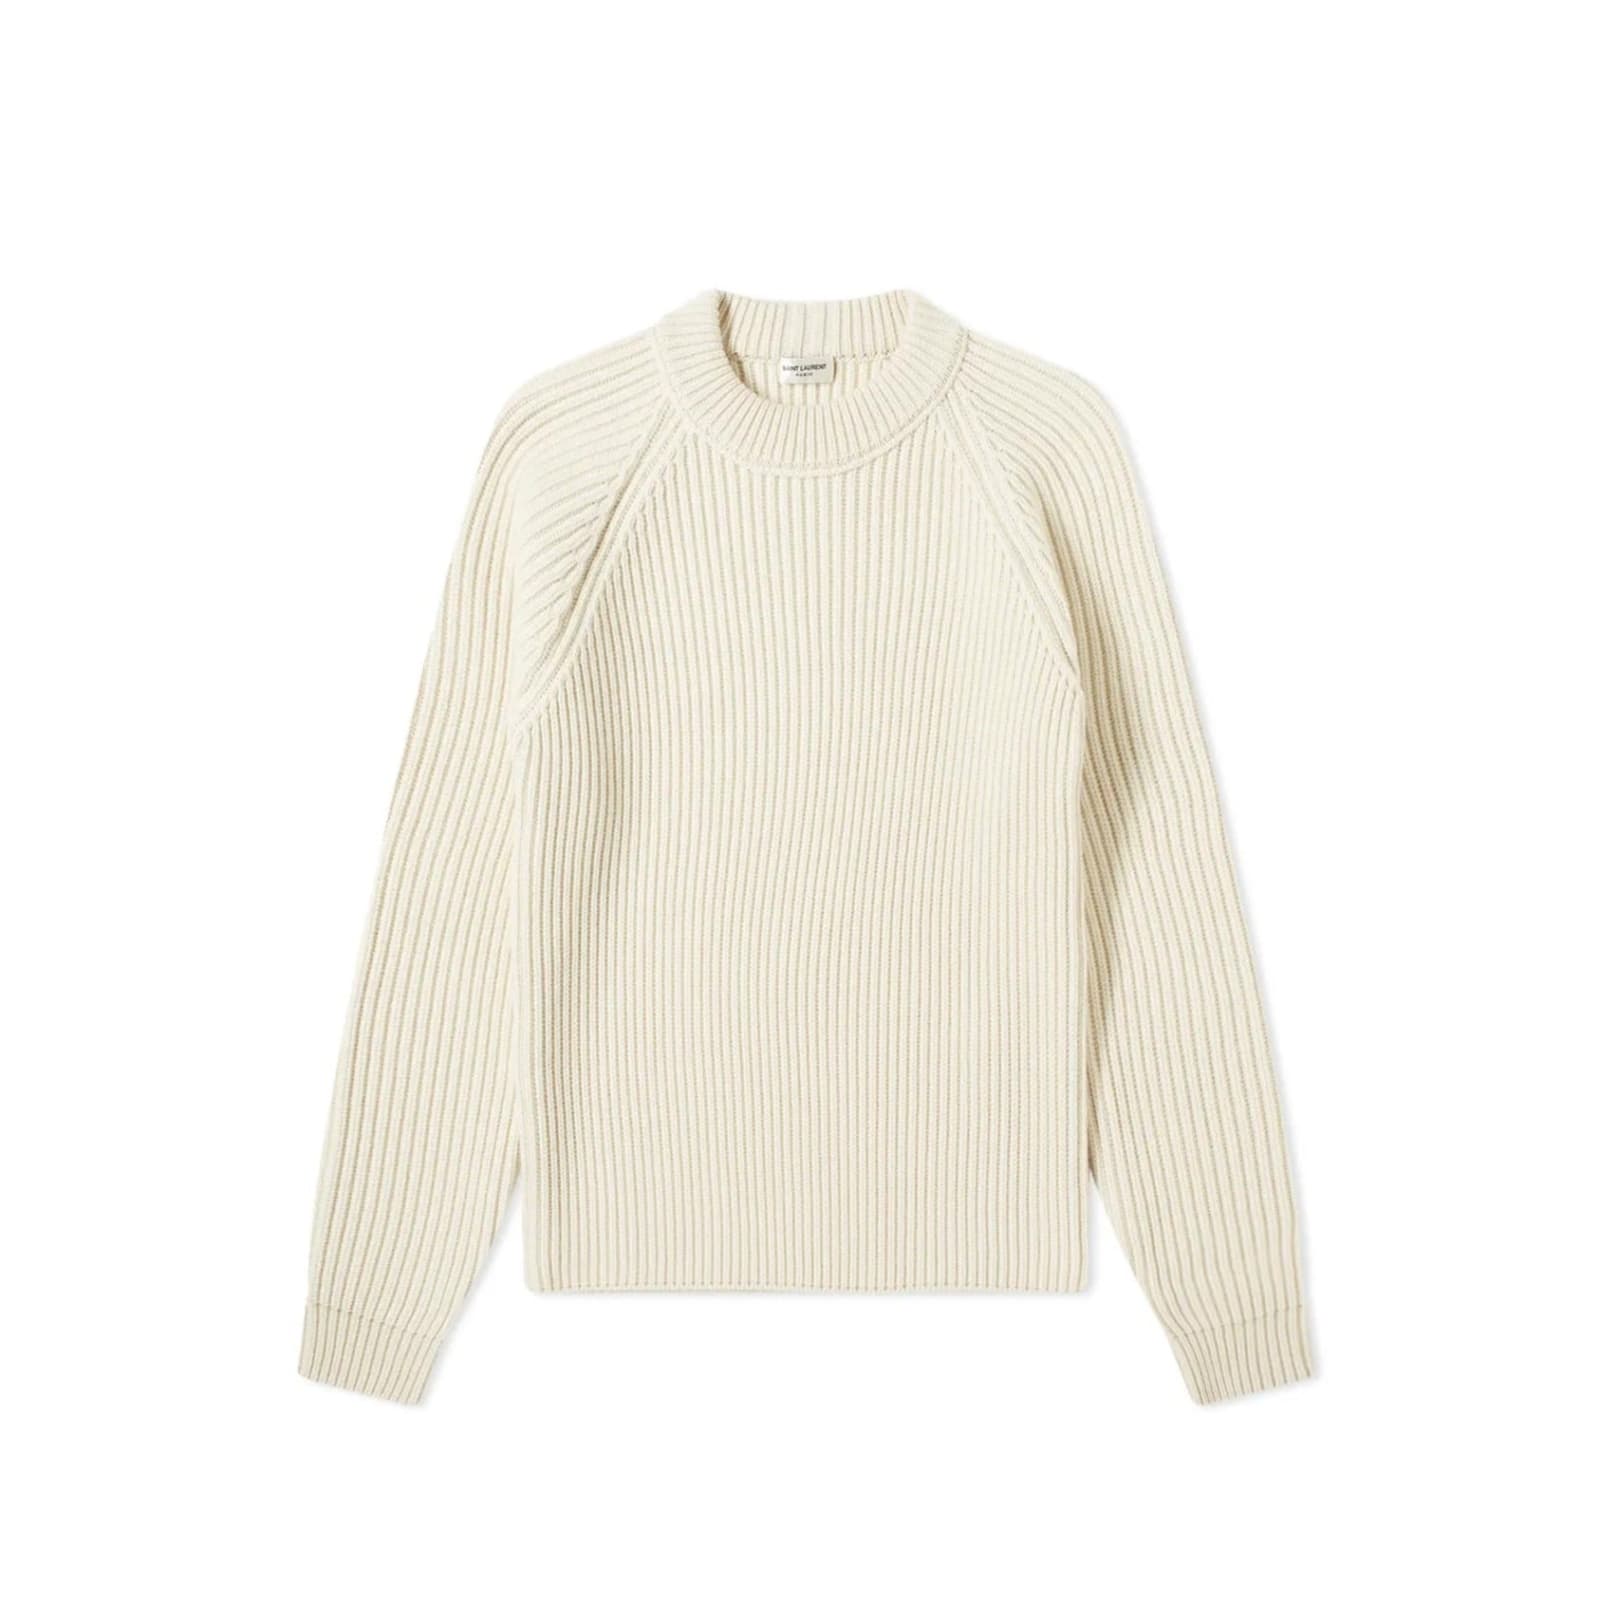 SAINT LAURENT WOOL AND CASHMERE SWEATER